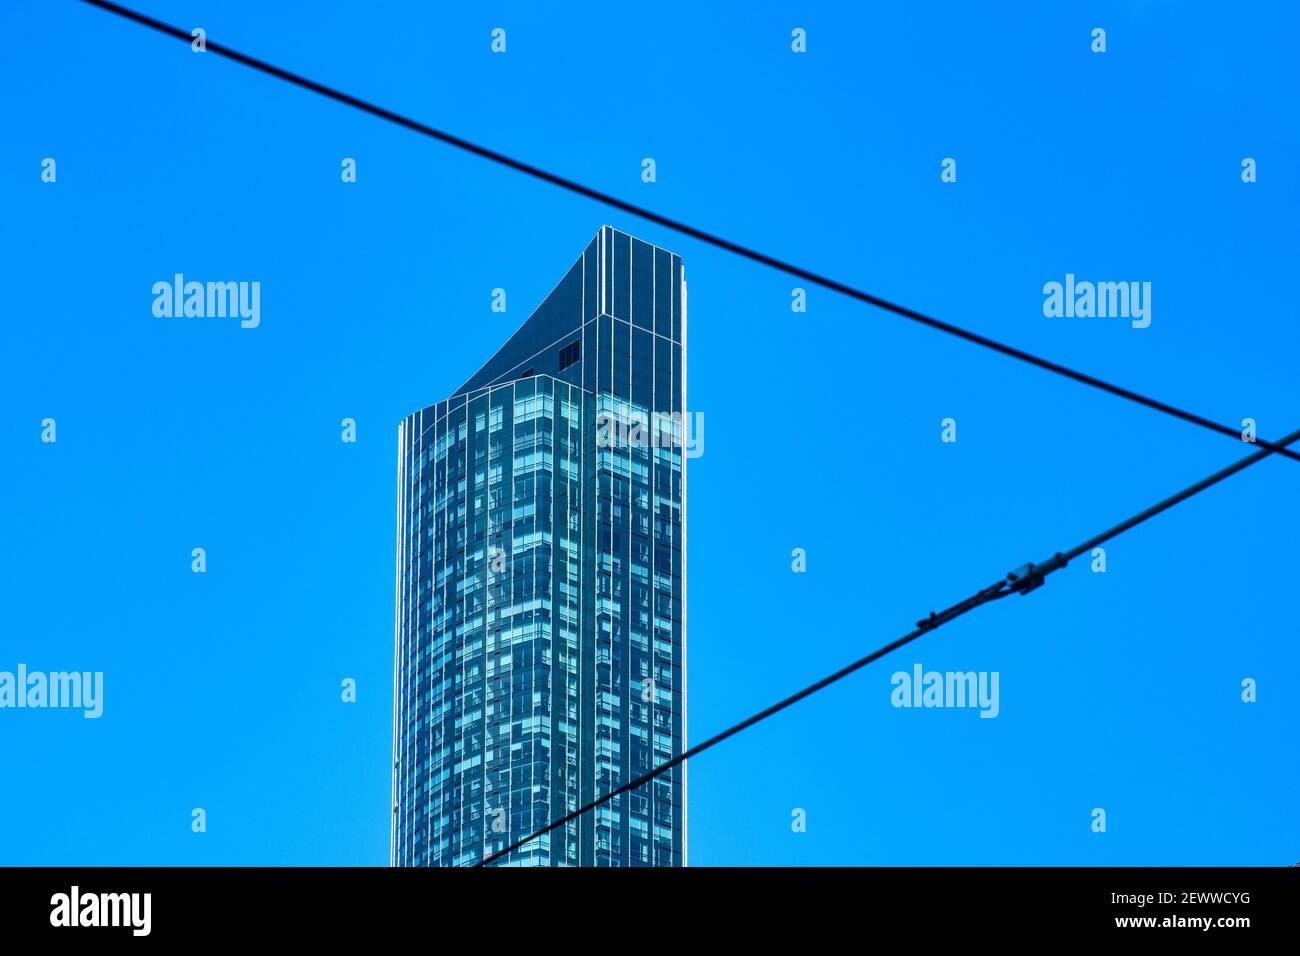 The Aura building framed between two electric wires, Toronto, Canada Stock Photo